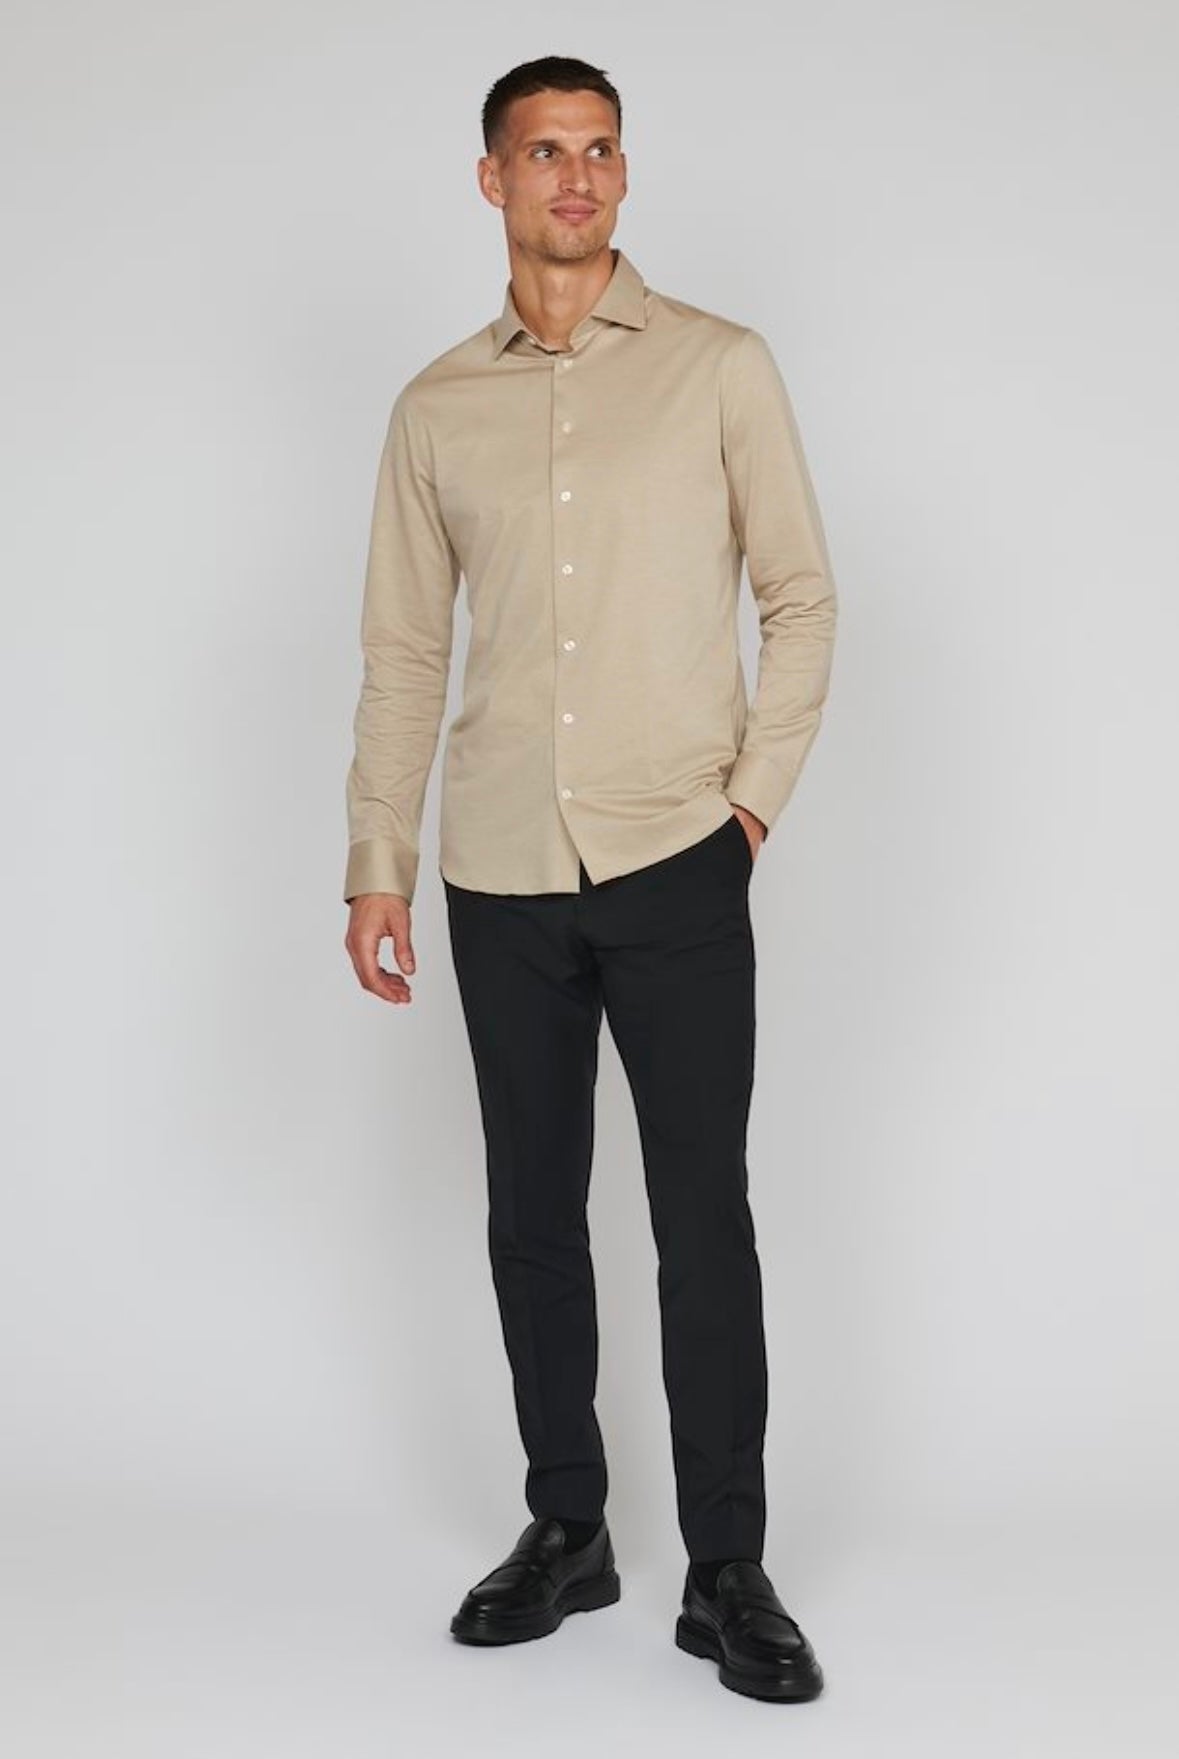 Matinique Marc shirt - Oyster Gray